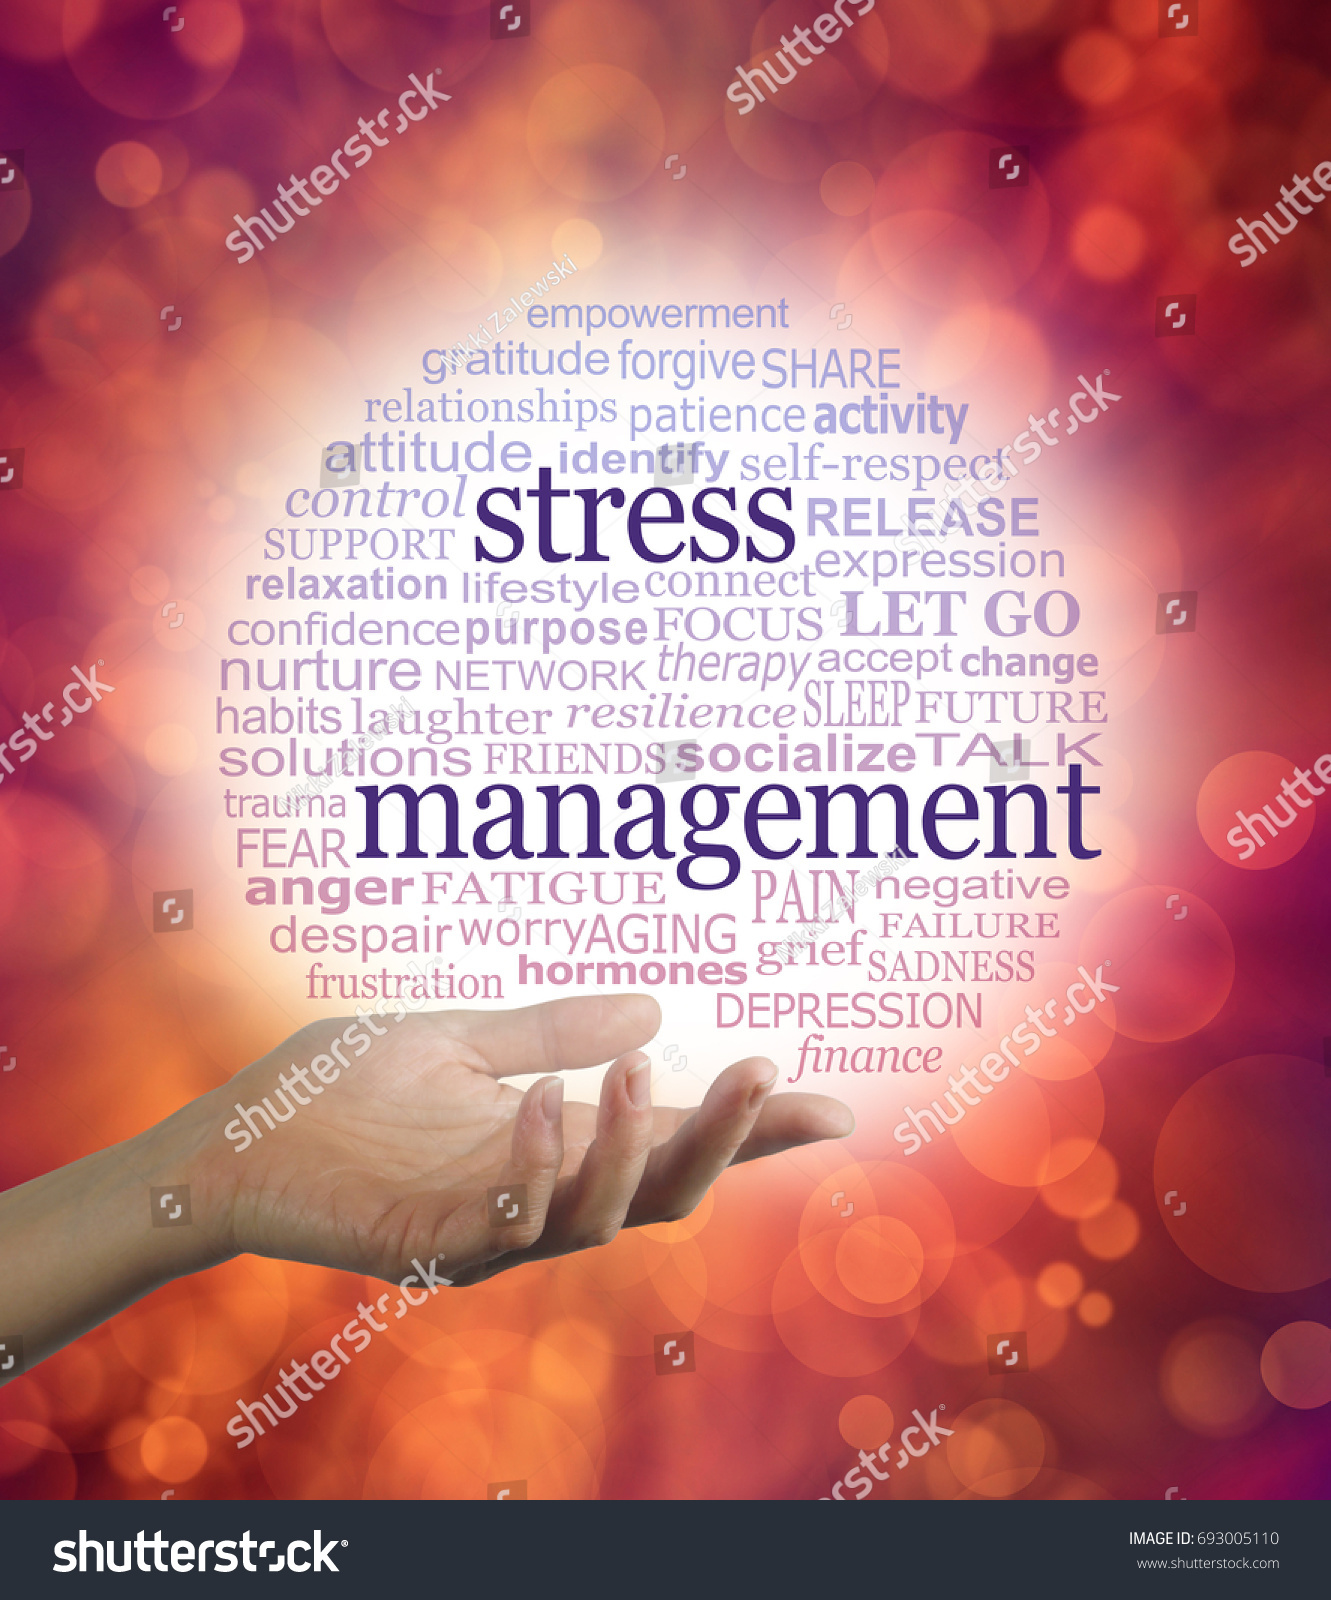 Stress Counselor with a Stress Management word bubble -  a hand held open with a red to blue graduated circular world cloud containing words relevant to stress management
 #693005110